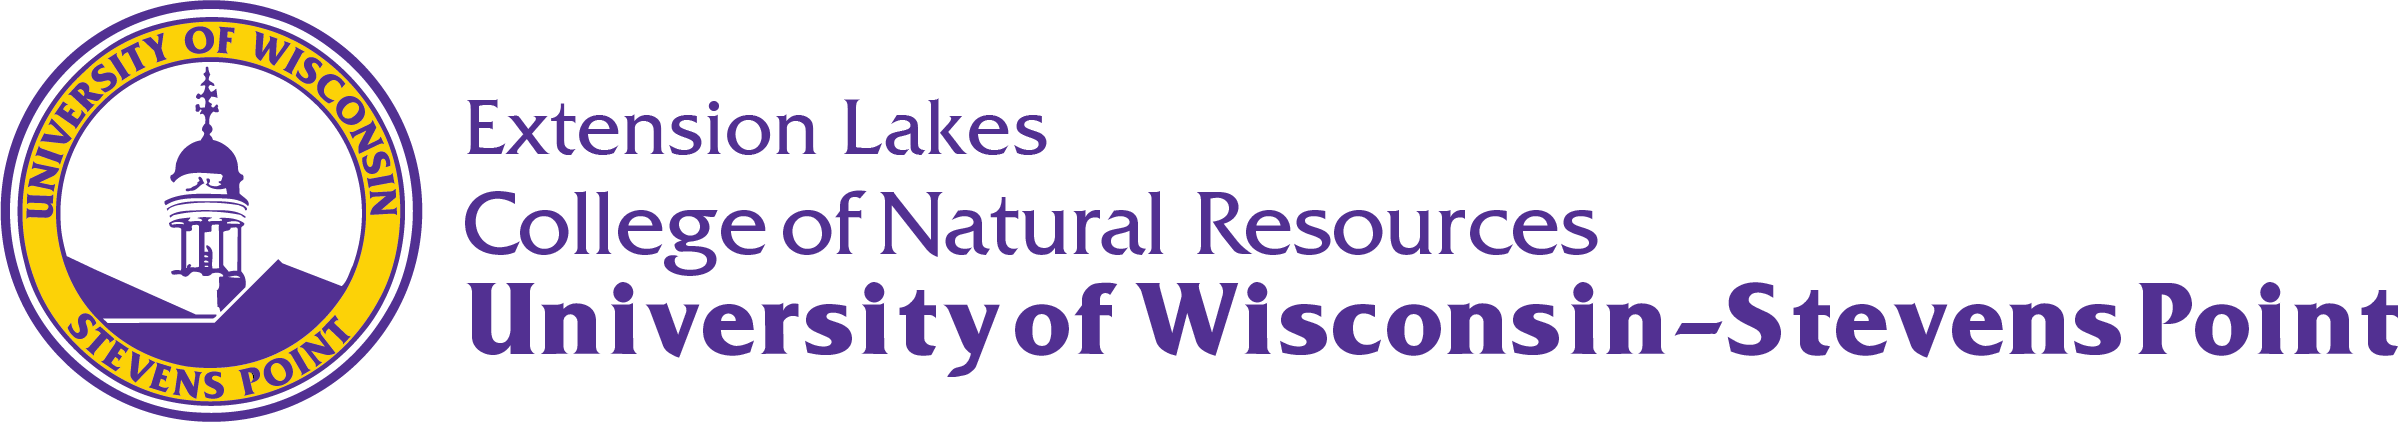 About Us - Extension Lakes | UWSP